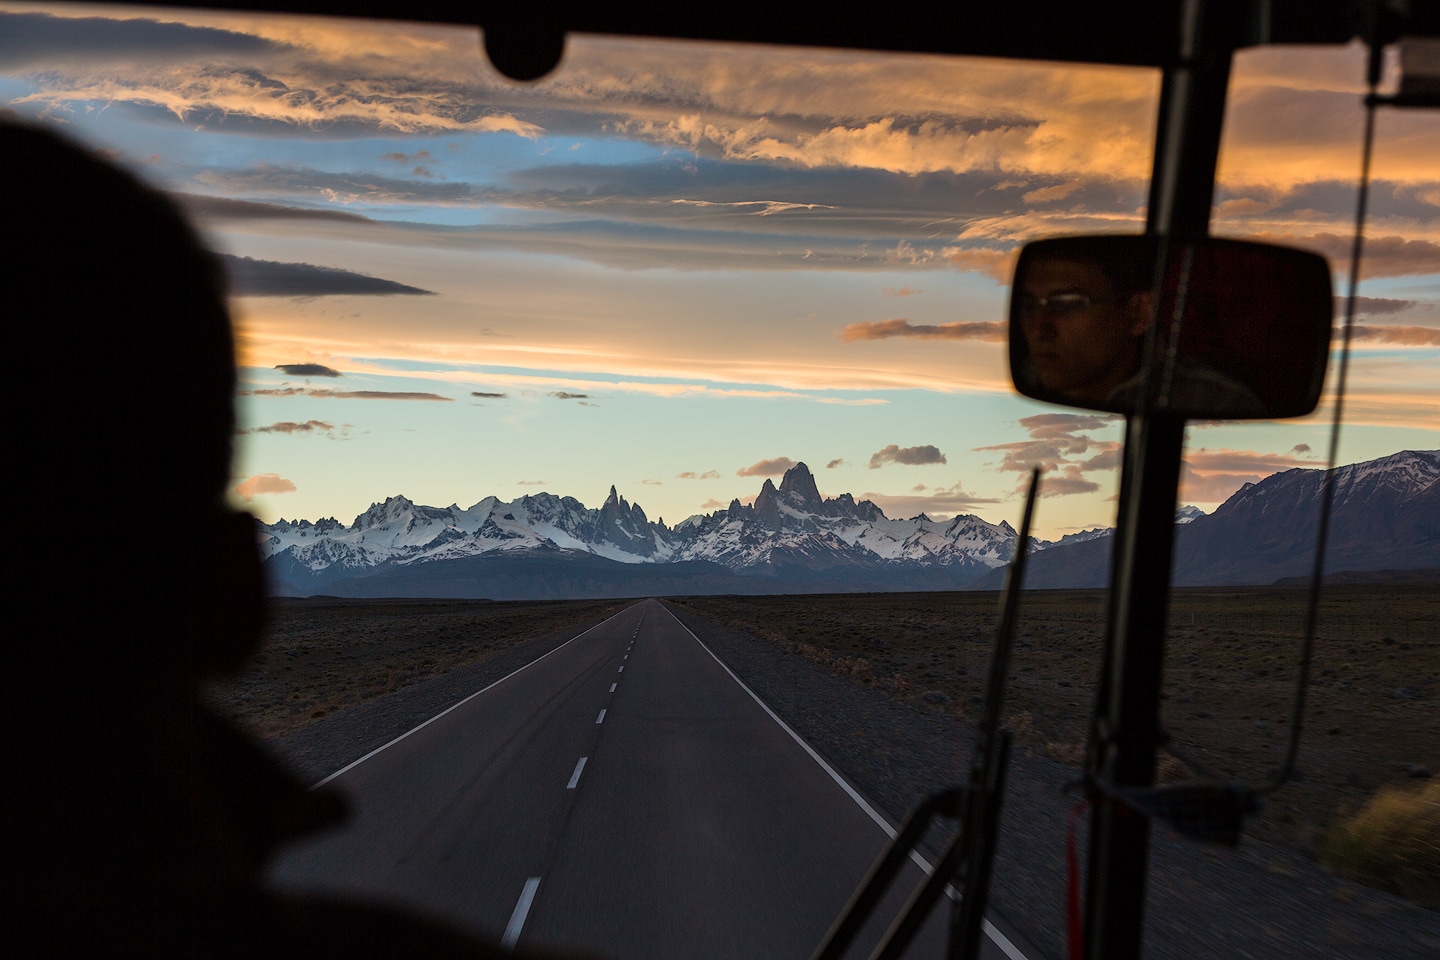 Cerro Torre and Fitz Roy seen through the Window of a bus on the road to El Chaltén.